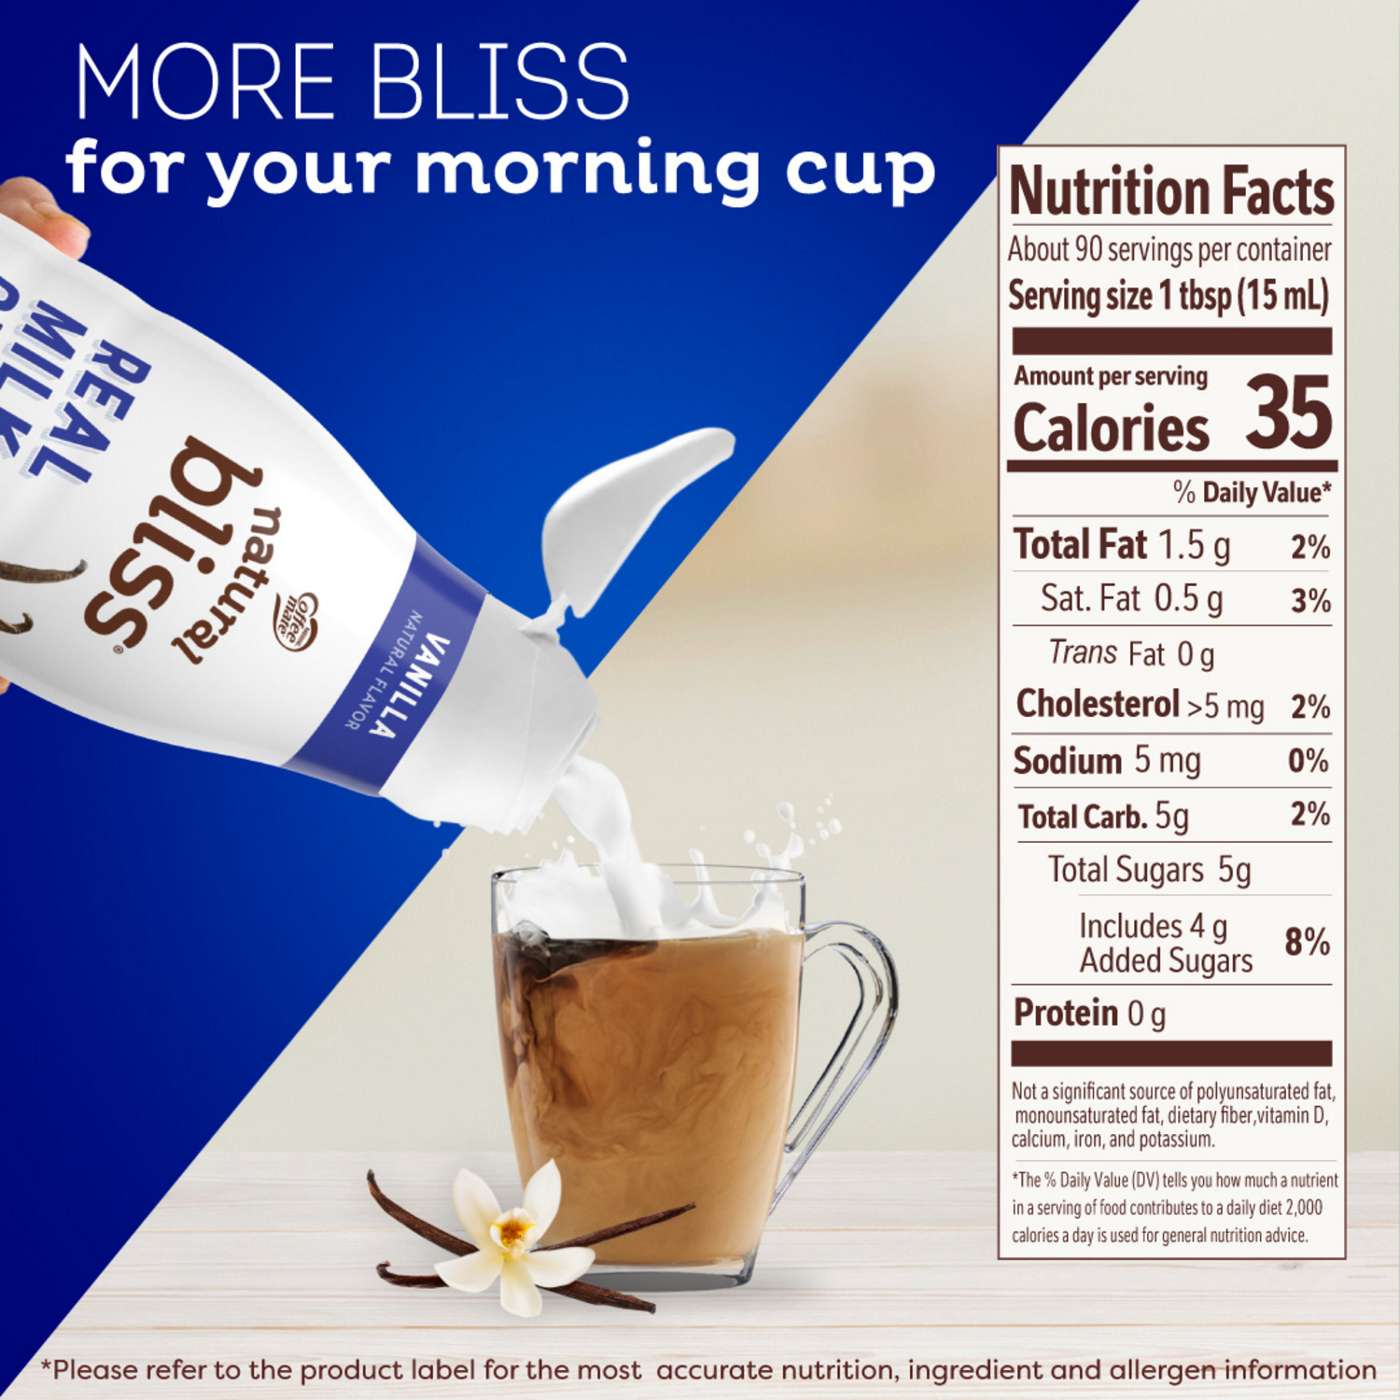 Coffee Mate Natural Bliss Vanilla Real Milk and Cream Coffee Creamer, 46 fl  oz - Foods Co.